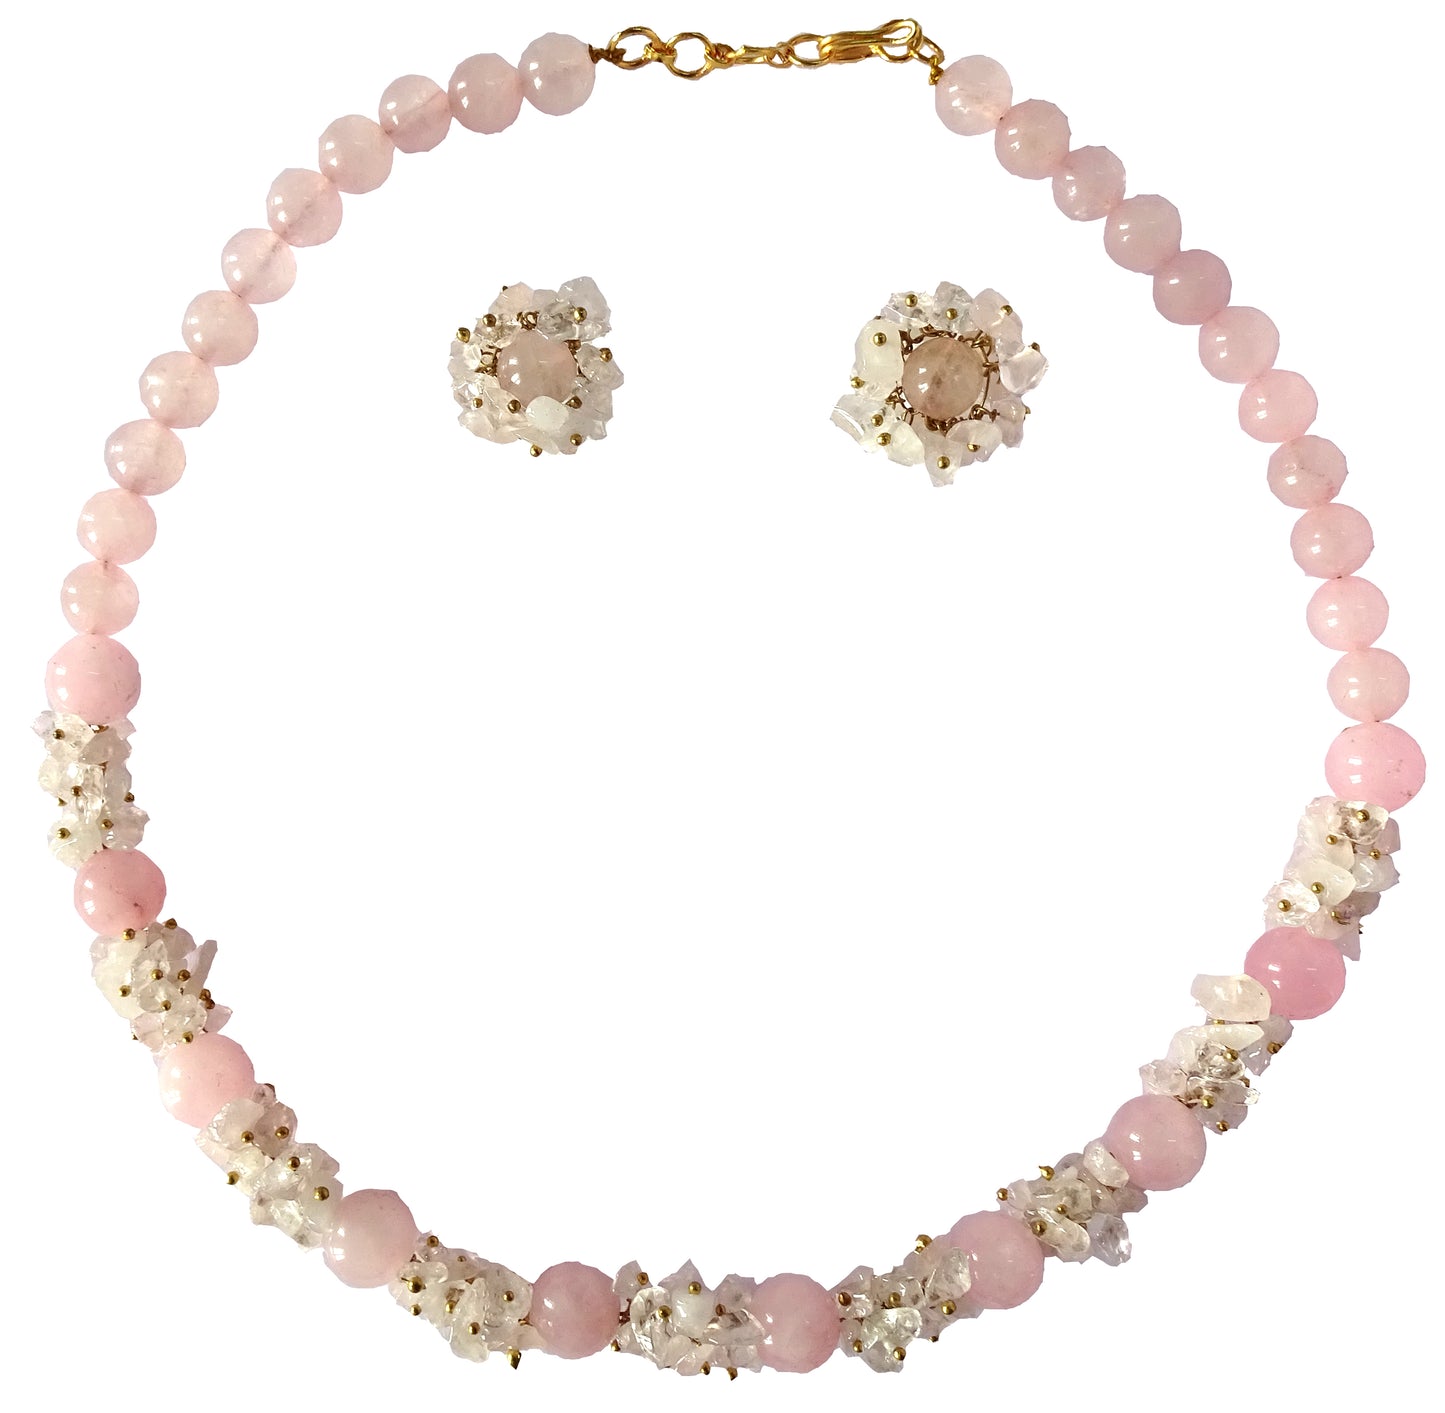 Centorganic - Semi Precious Gemstone Crystal Beads Necklace with Earring ,Rose Quartz Stone chip, round bead of 10mm, 8mm and length 16" Mala for Girl and Women Fashion Jewellery, with beautiful jewellery box for gifting.